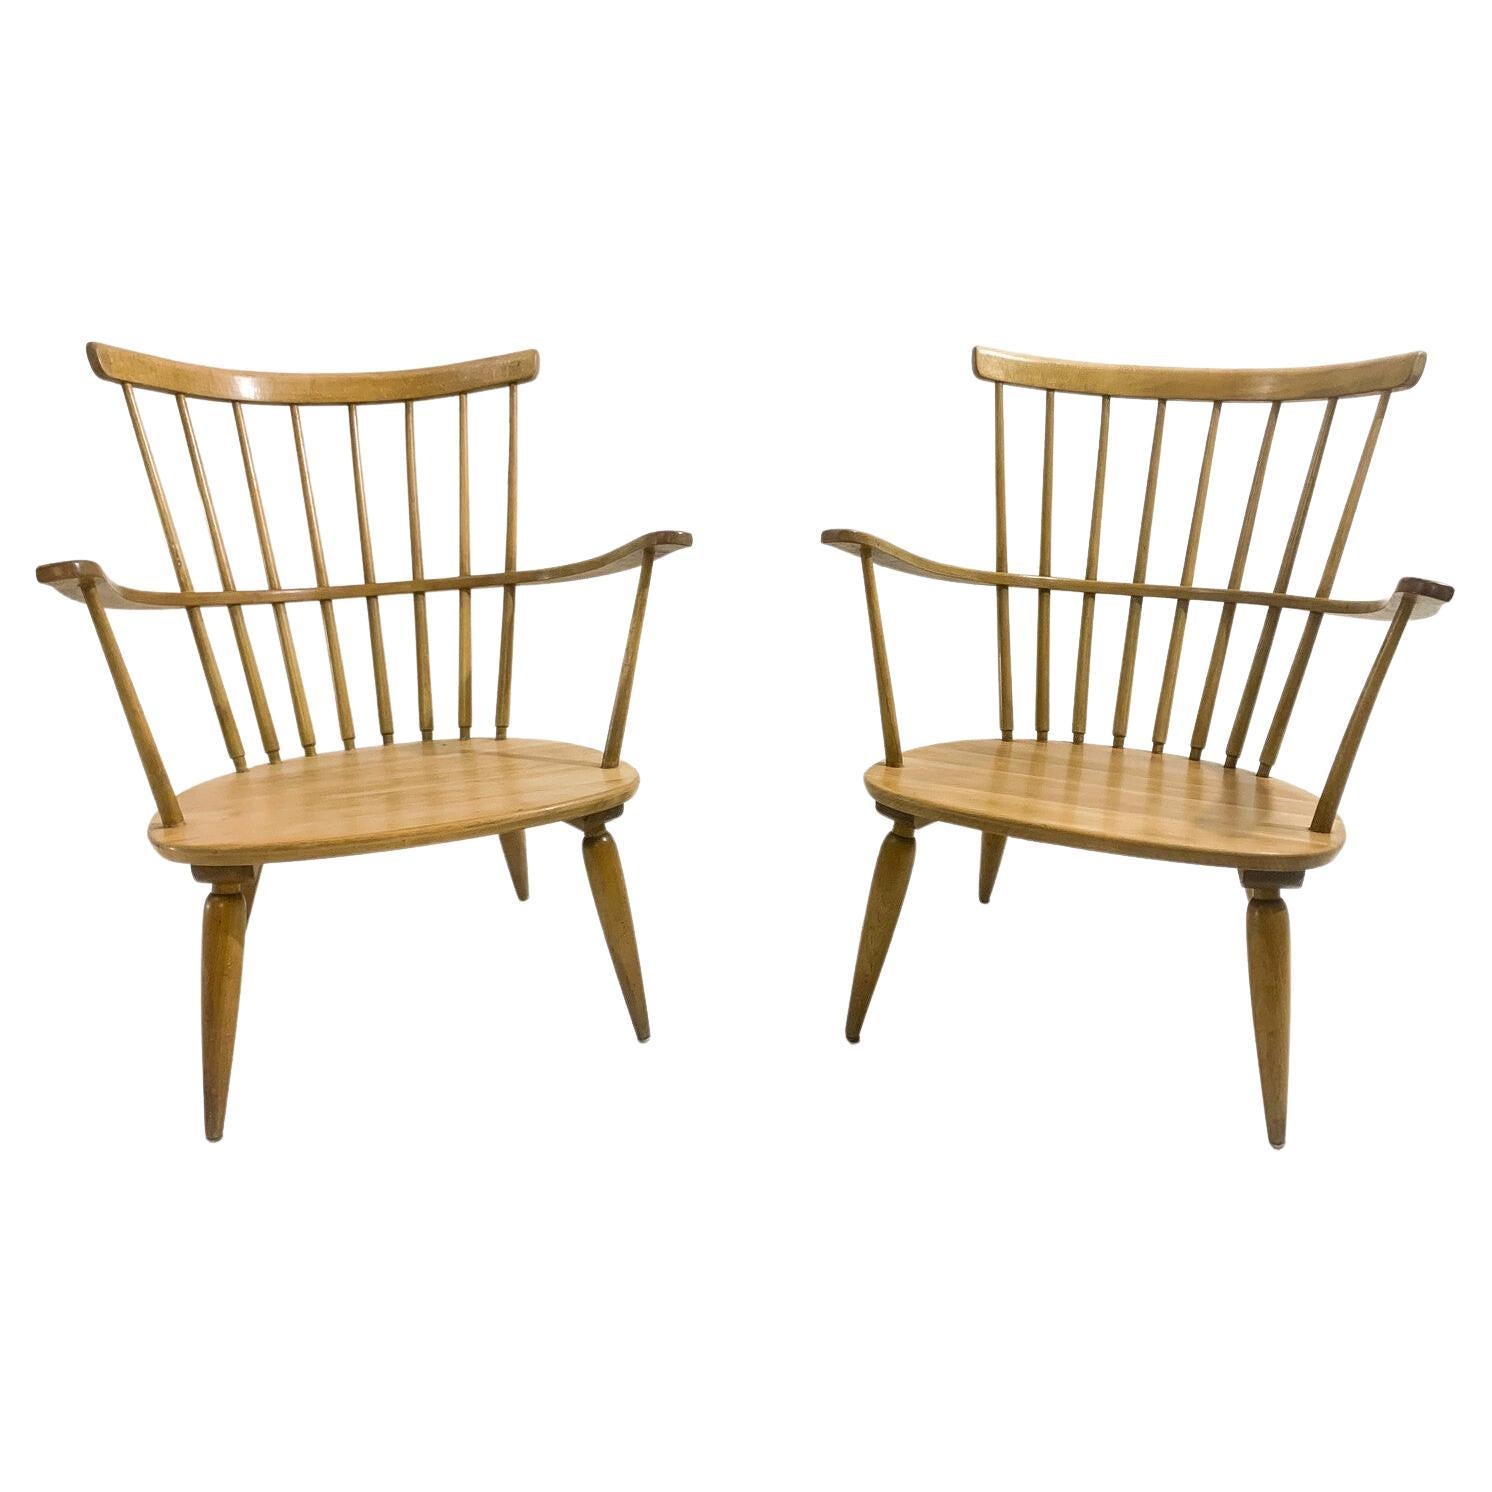 Midcentury Pair of Altheim Armchairs by Franz Schuster for Wiesner-Hager, 1950s